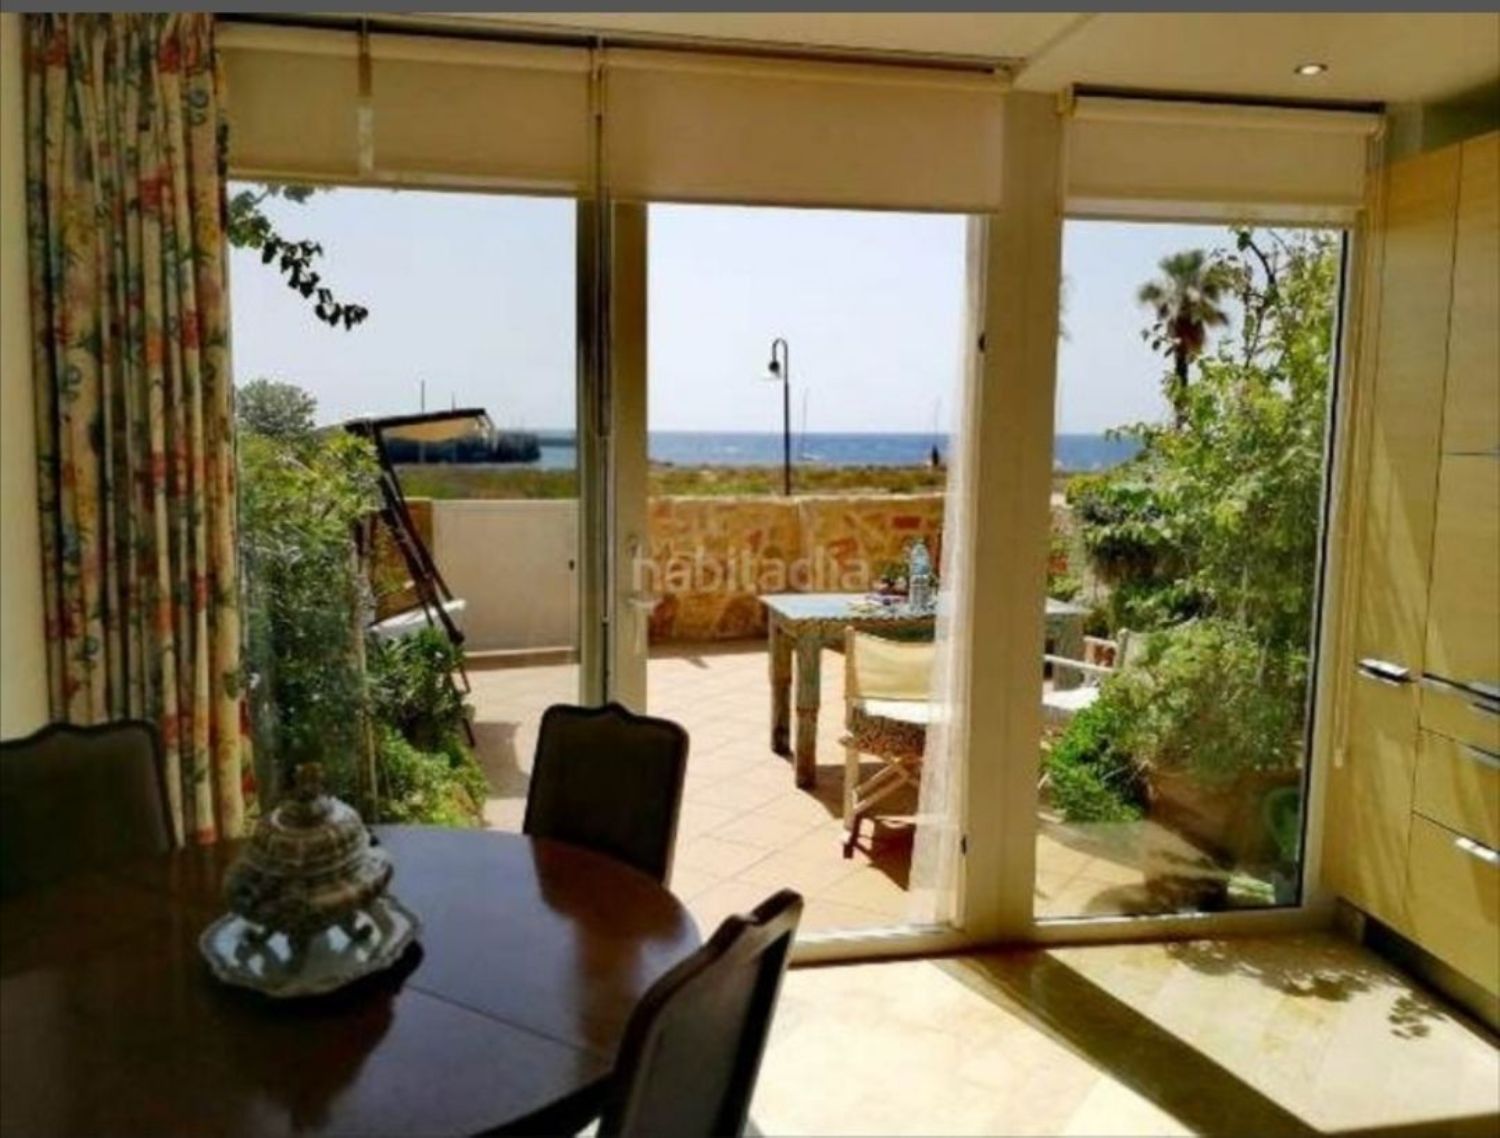 Flat for sale on the seafront in Calle Magnífics Jurats, in Menorca